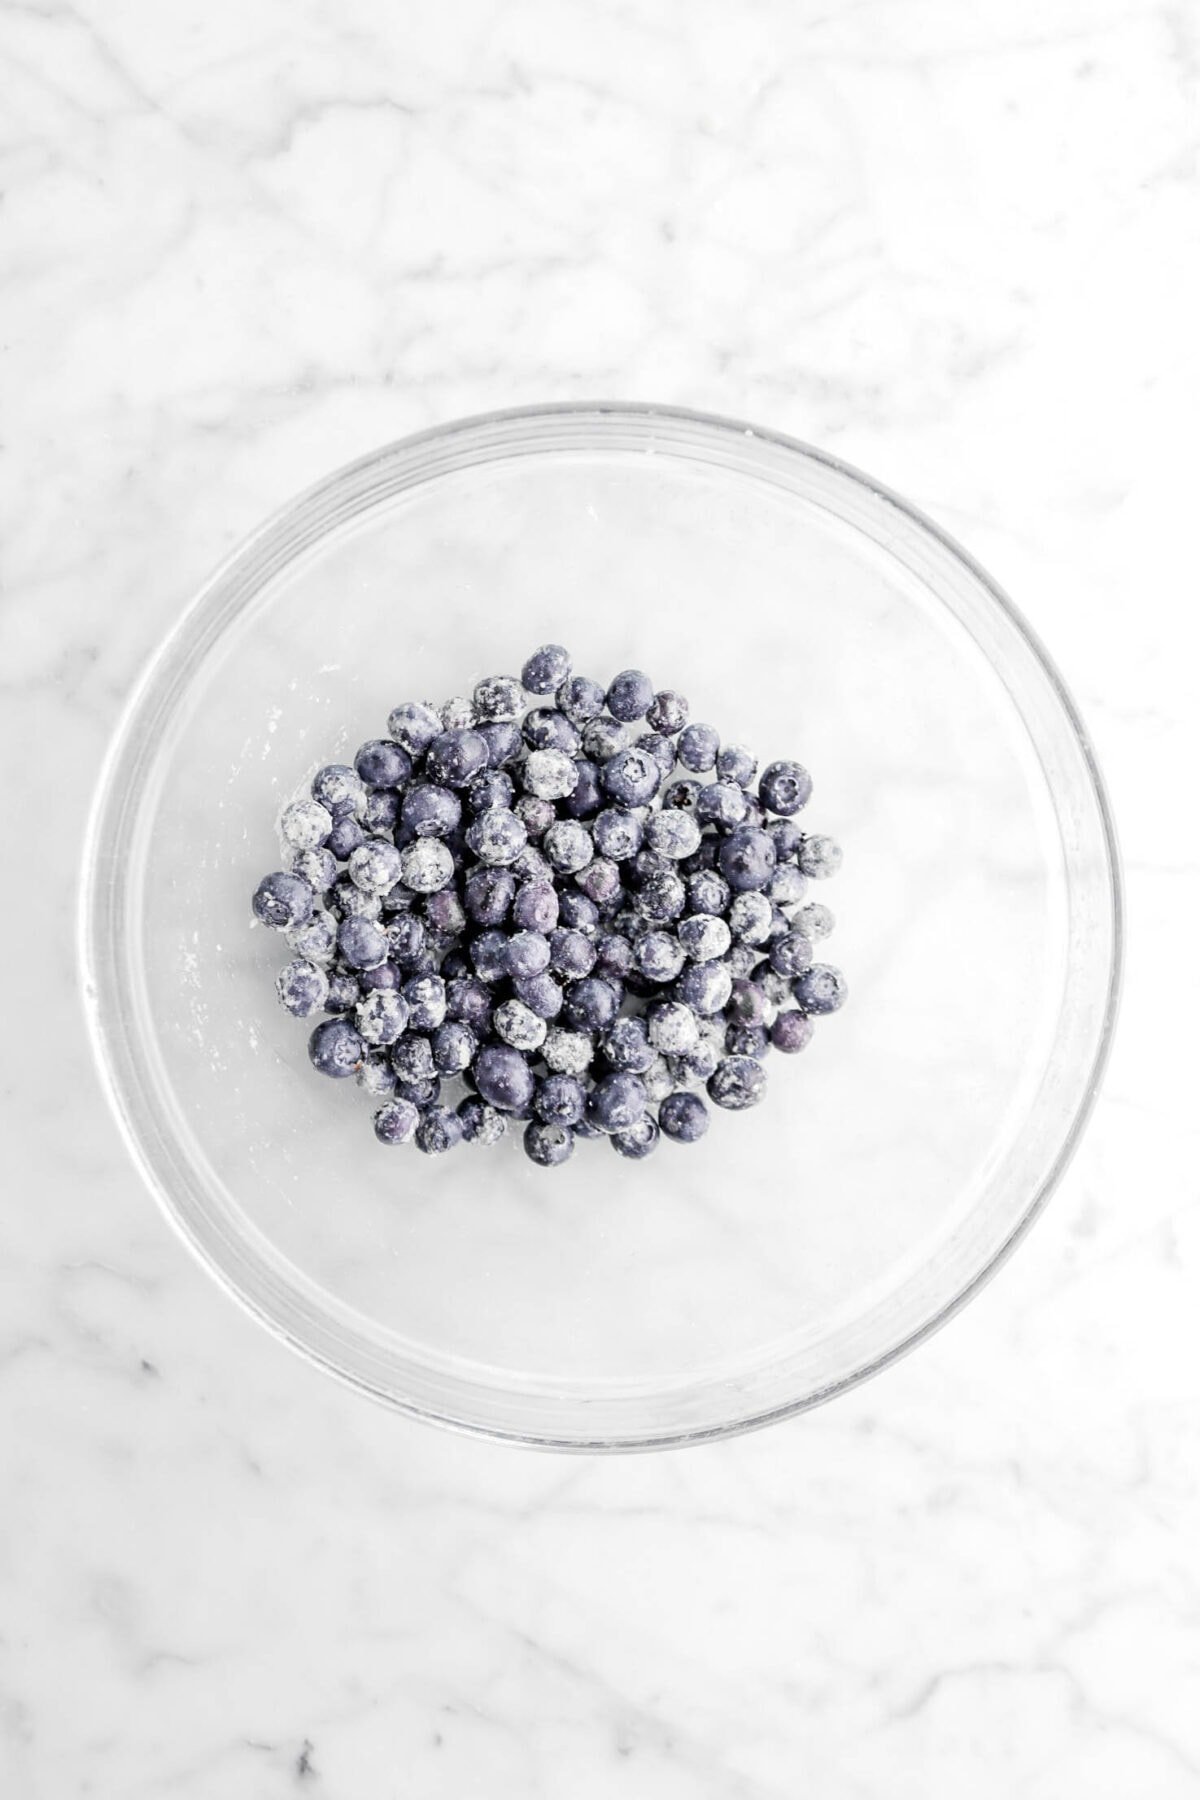 blueberries coated in flour in glass bowl